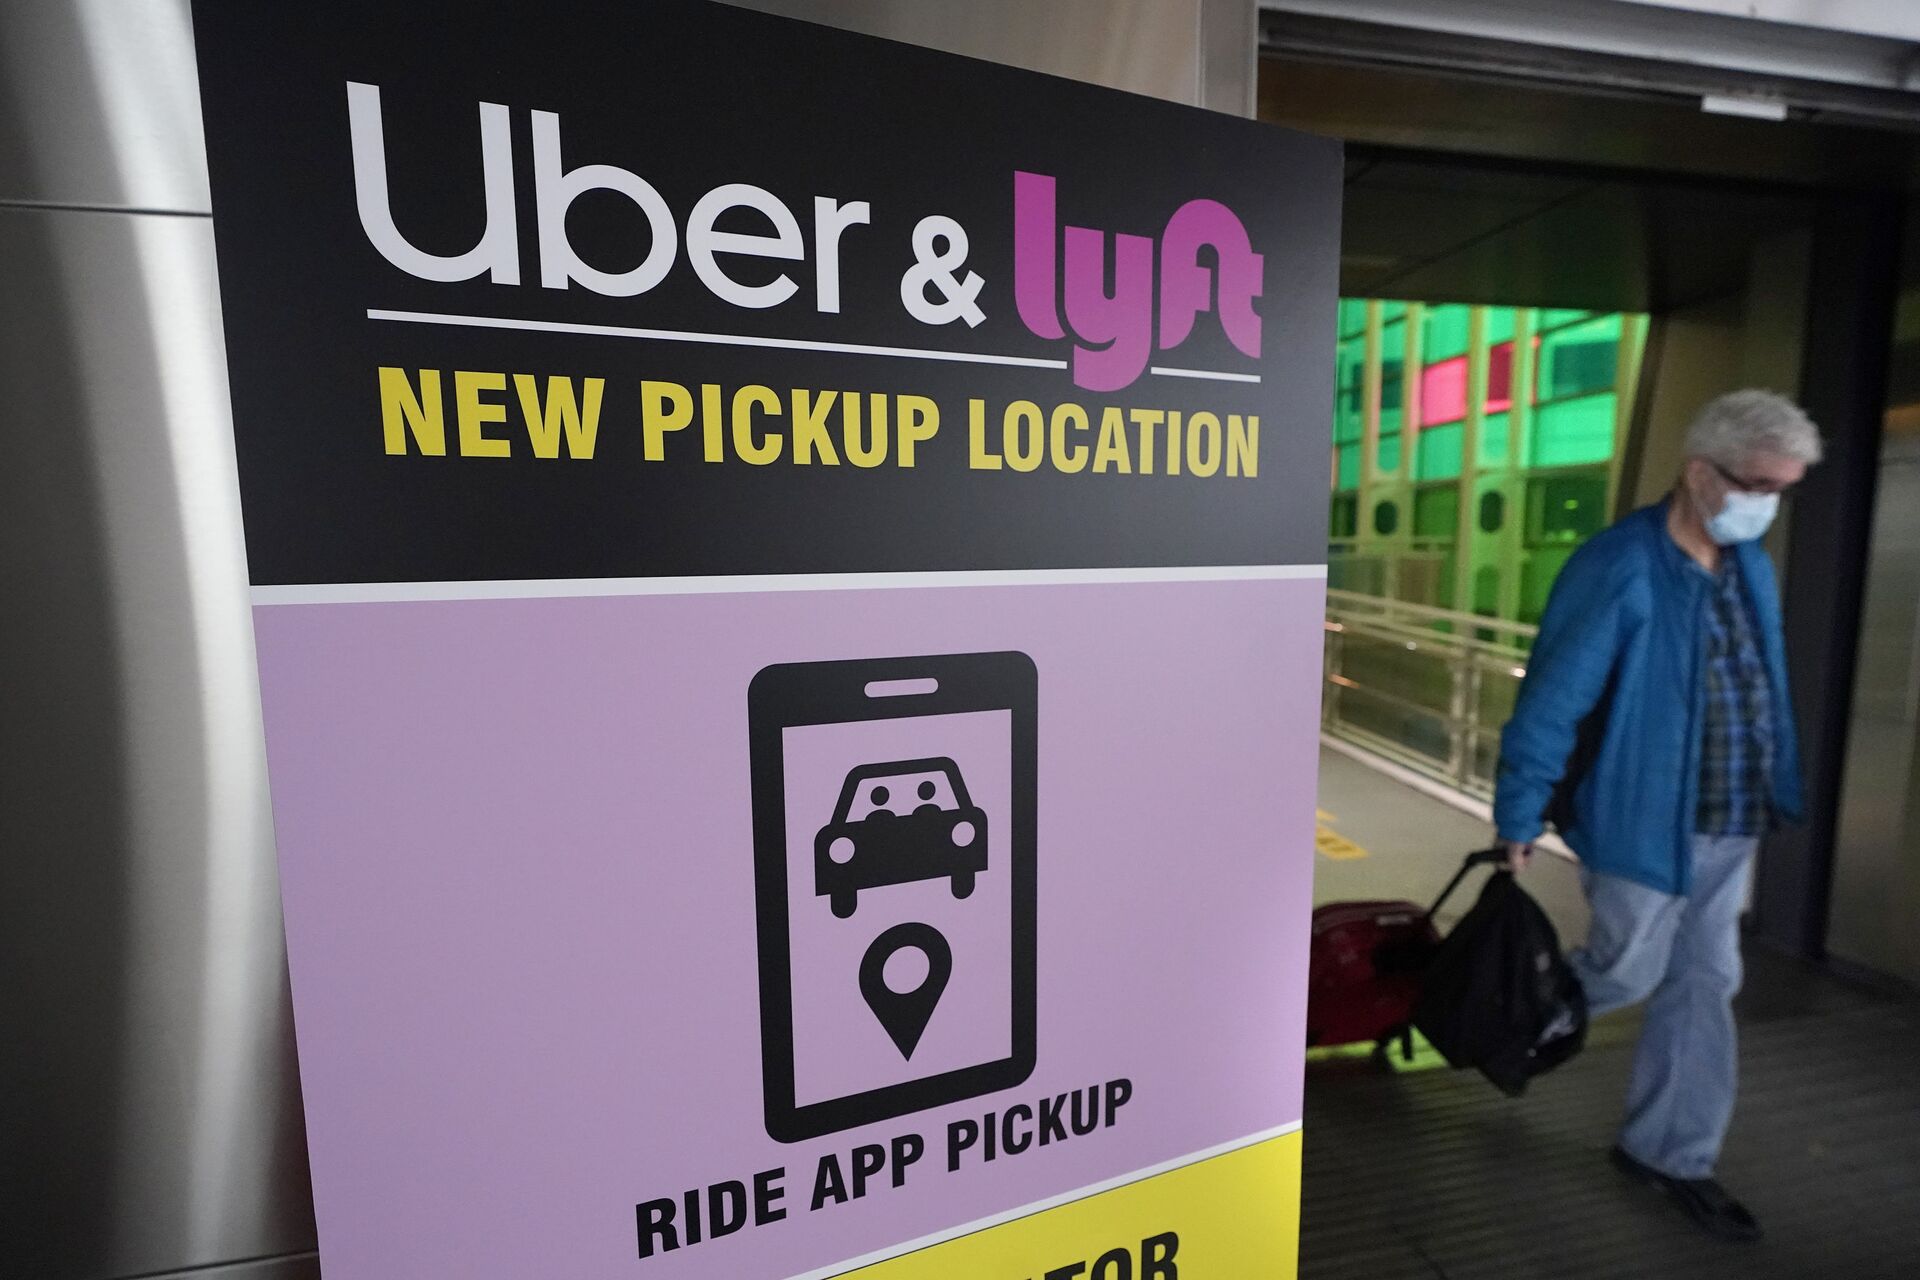 A passer-by pulls luggage while walking past a sign offering directions to an Uber and Lyft ride pickup location at Logan International Airport, in Boston, Tuesday, Feb. 9, 2021. Businesses like Uber, Airbnb and Square were born in recessions. Now, the effects of COVID-19 are forcing existing businesses to reinvent themselves, and some of today's most significant business obstacles will spark new startups offering innovative solutions. (AP Photo/Steven Senne) - Sputnik International, 1920, 07.09.2021